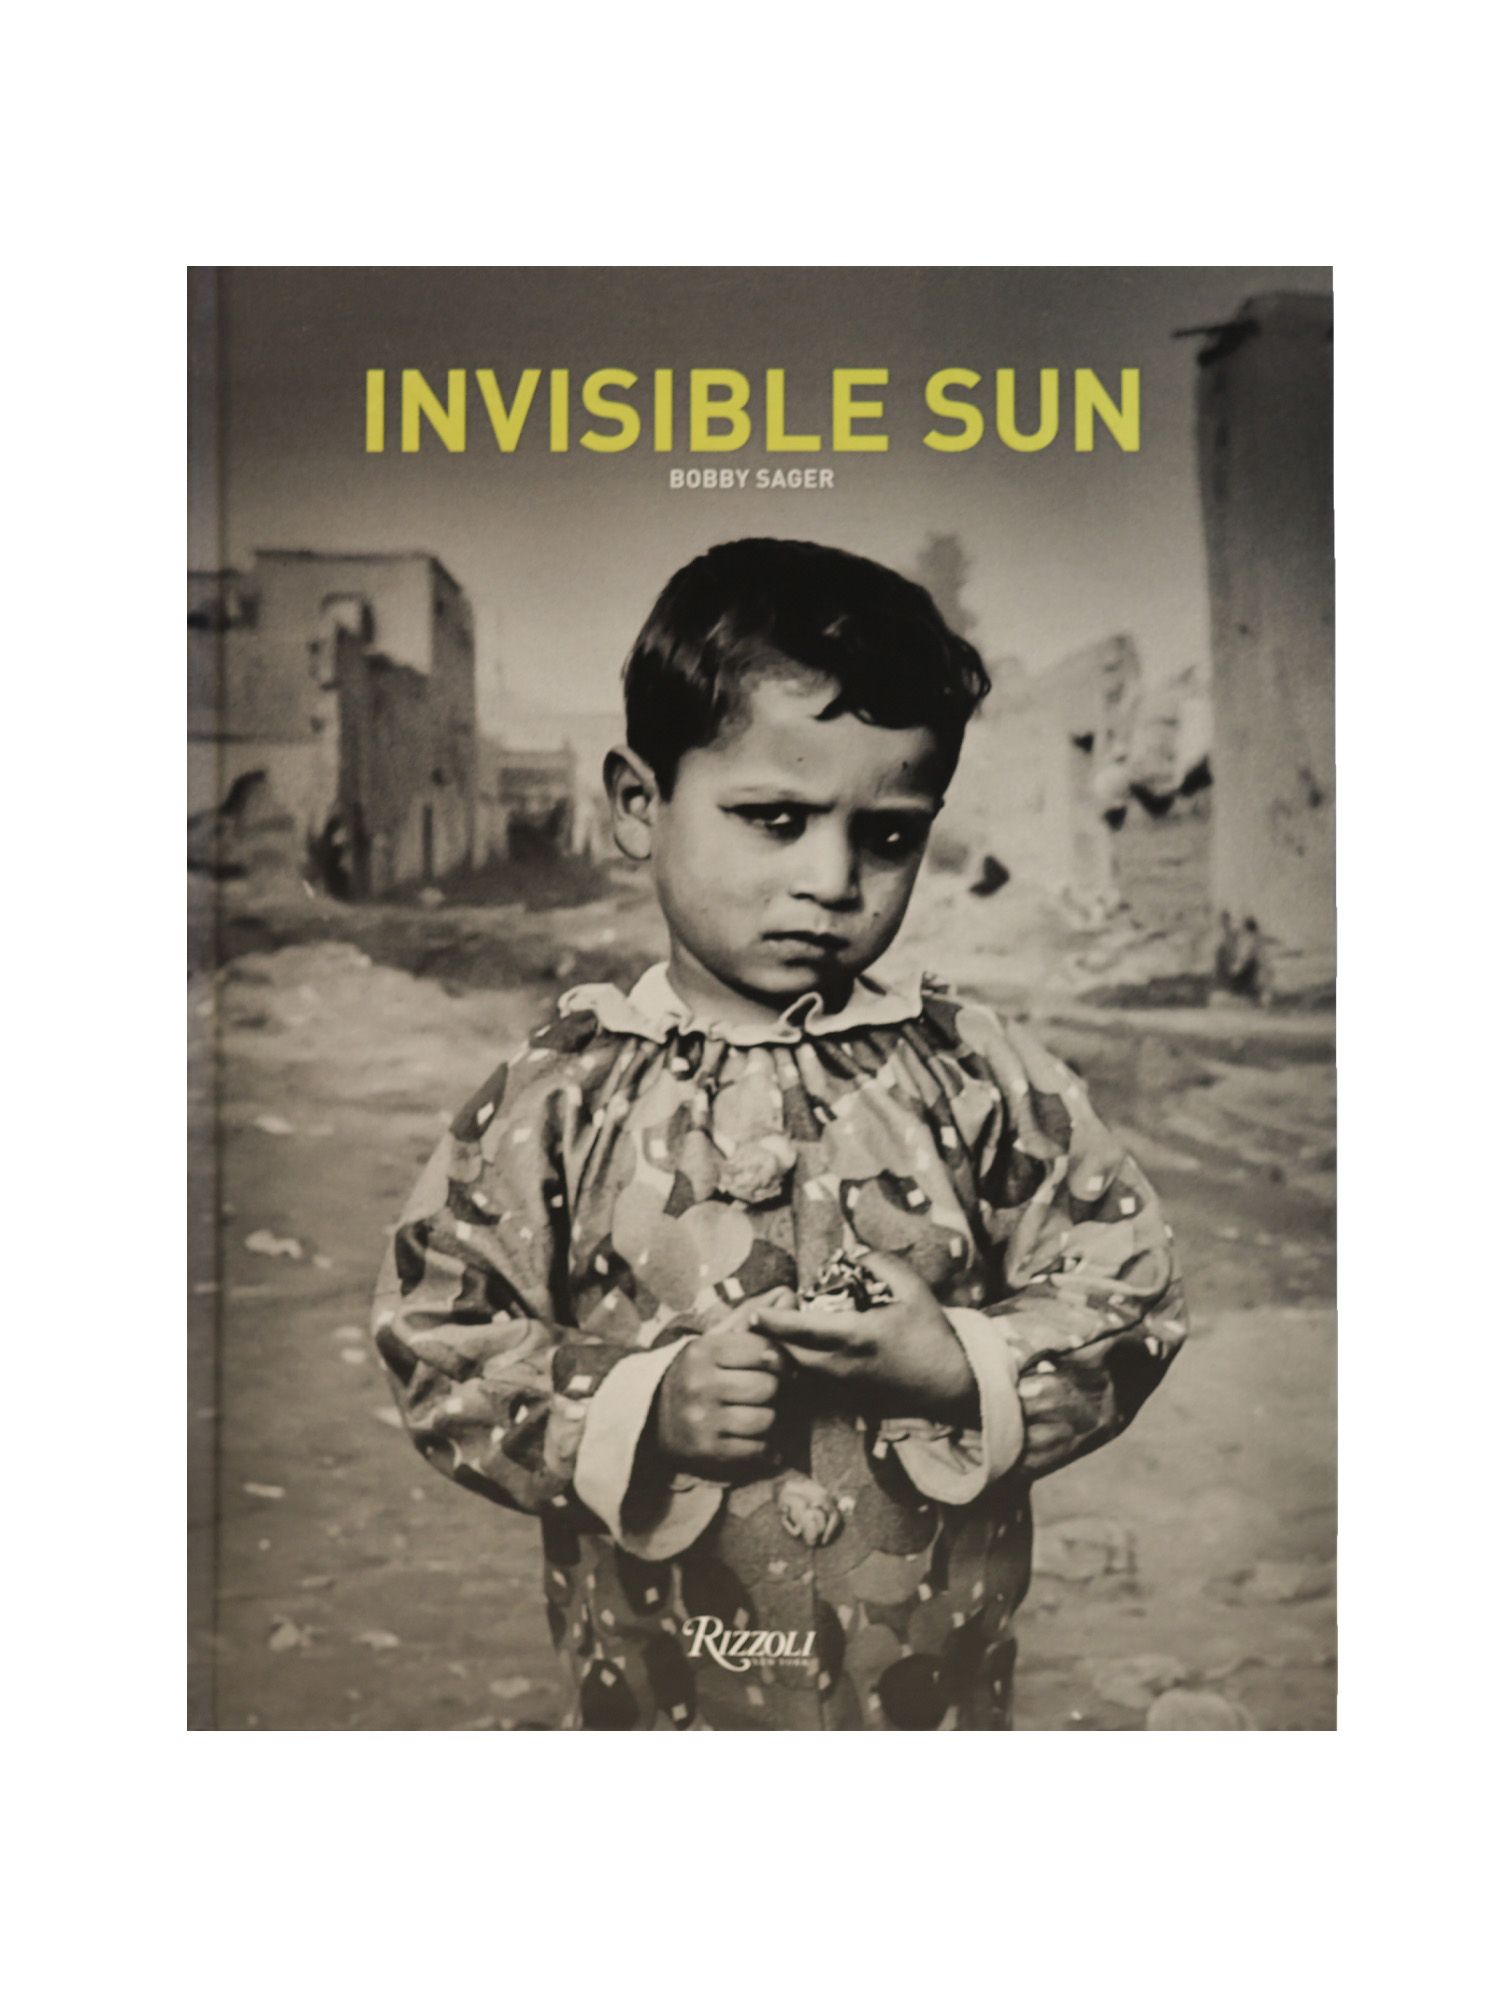 Invisible sun - Bobby Sager